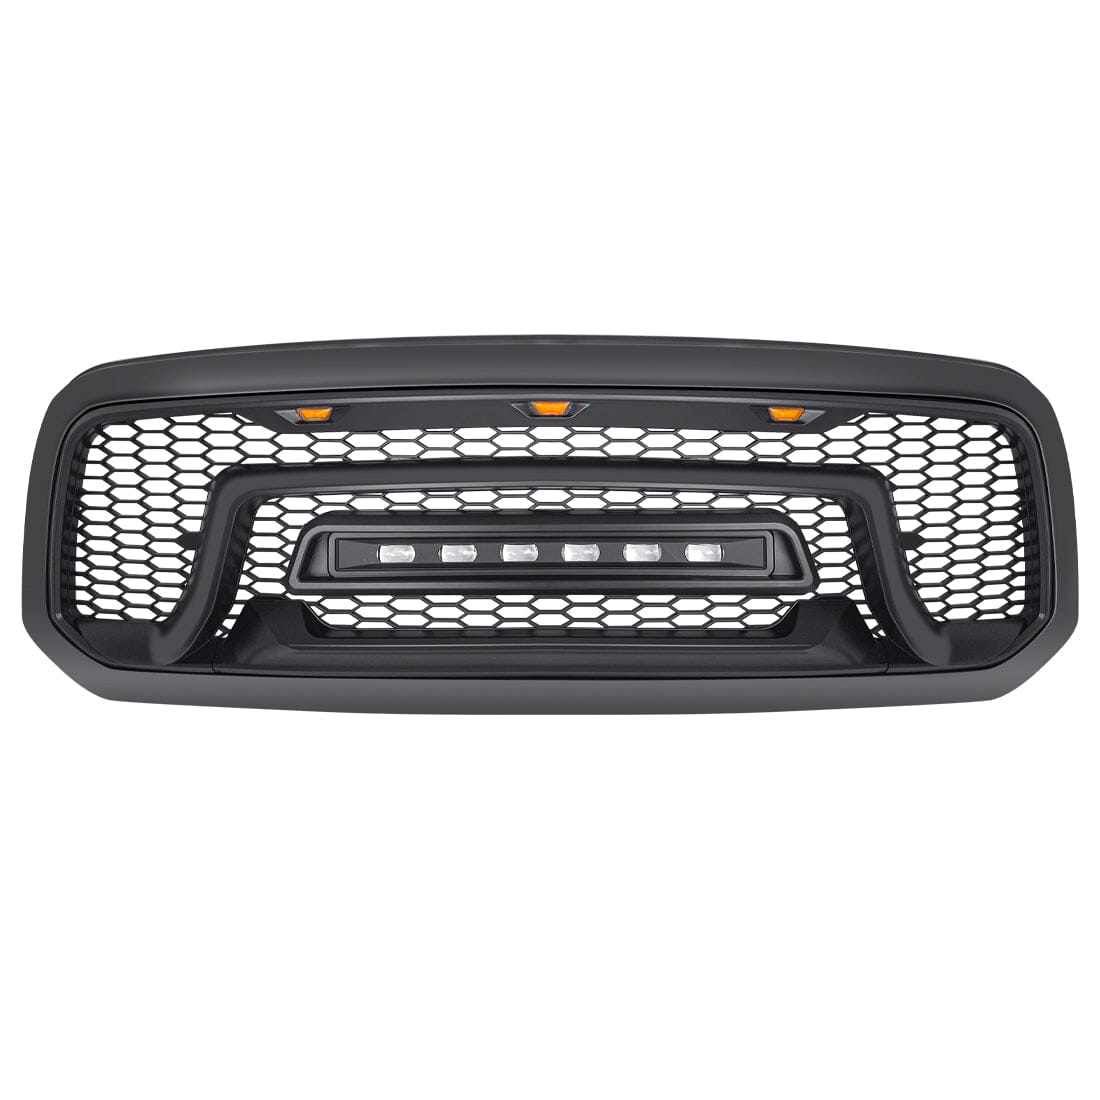 Armor Grille w/Off-Road Lights For 2013-2018 Dodge Ram 1500 | In Stock On May 15